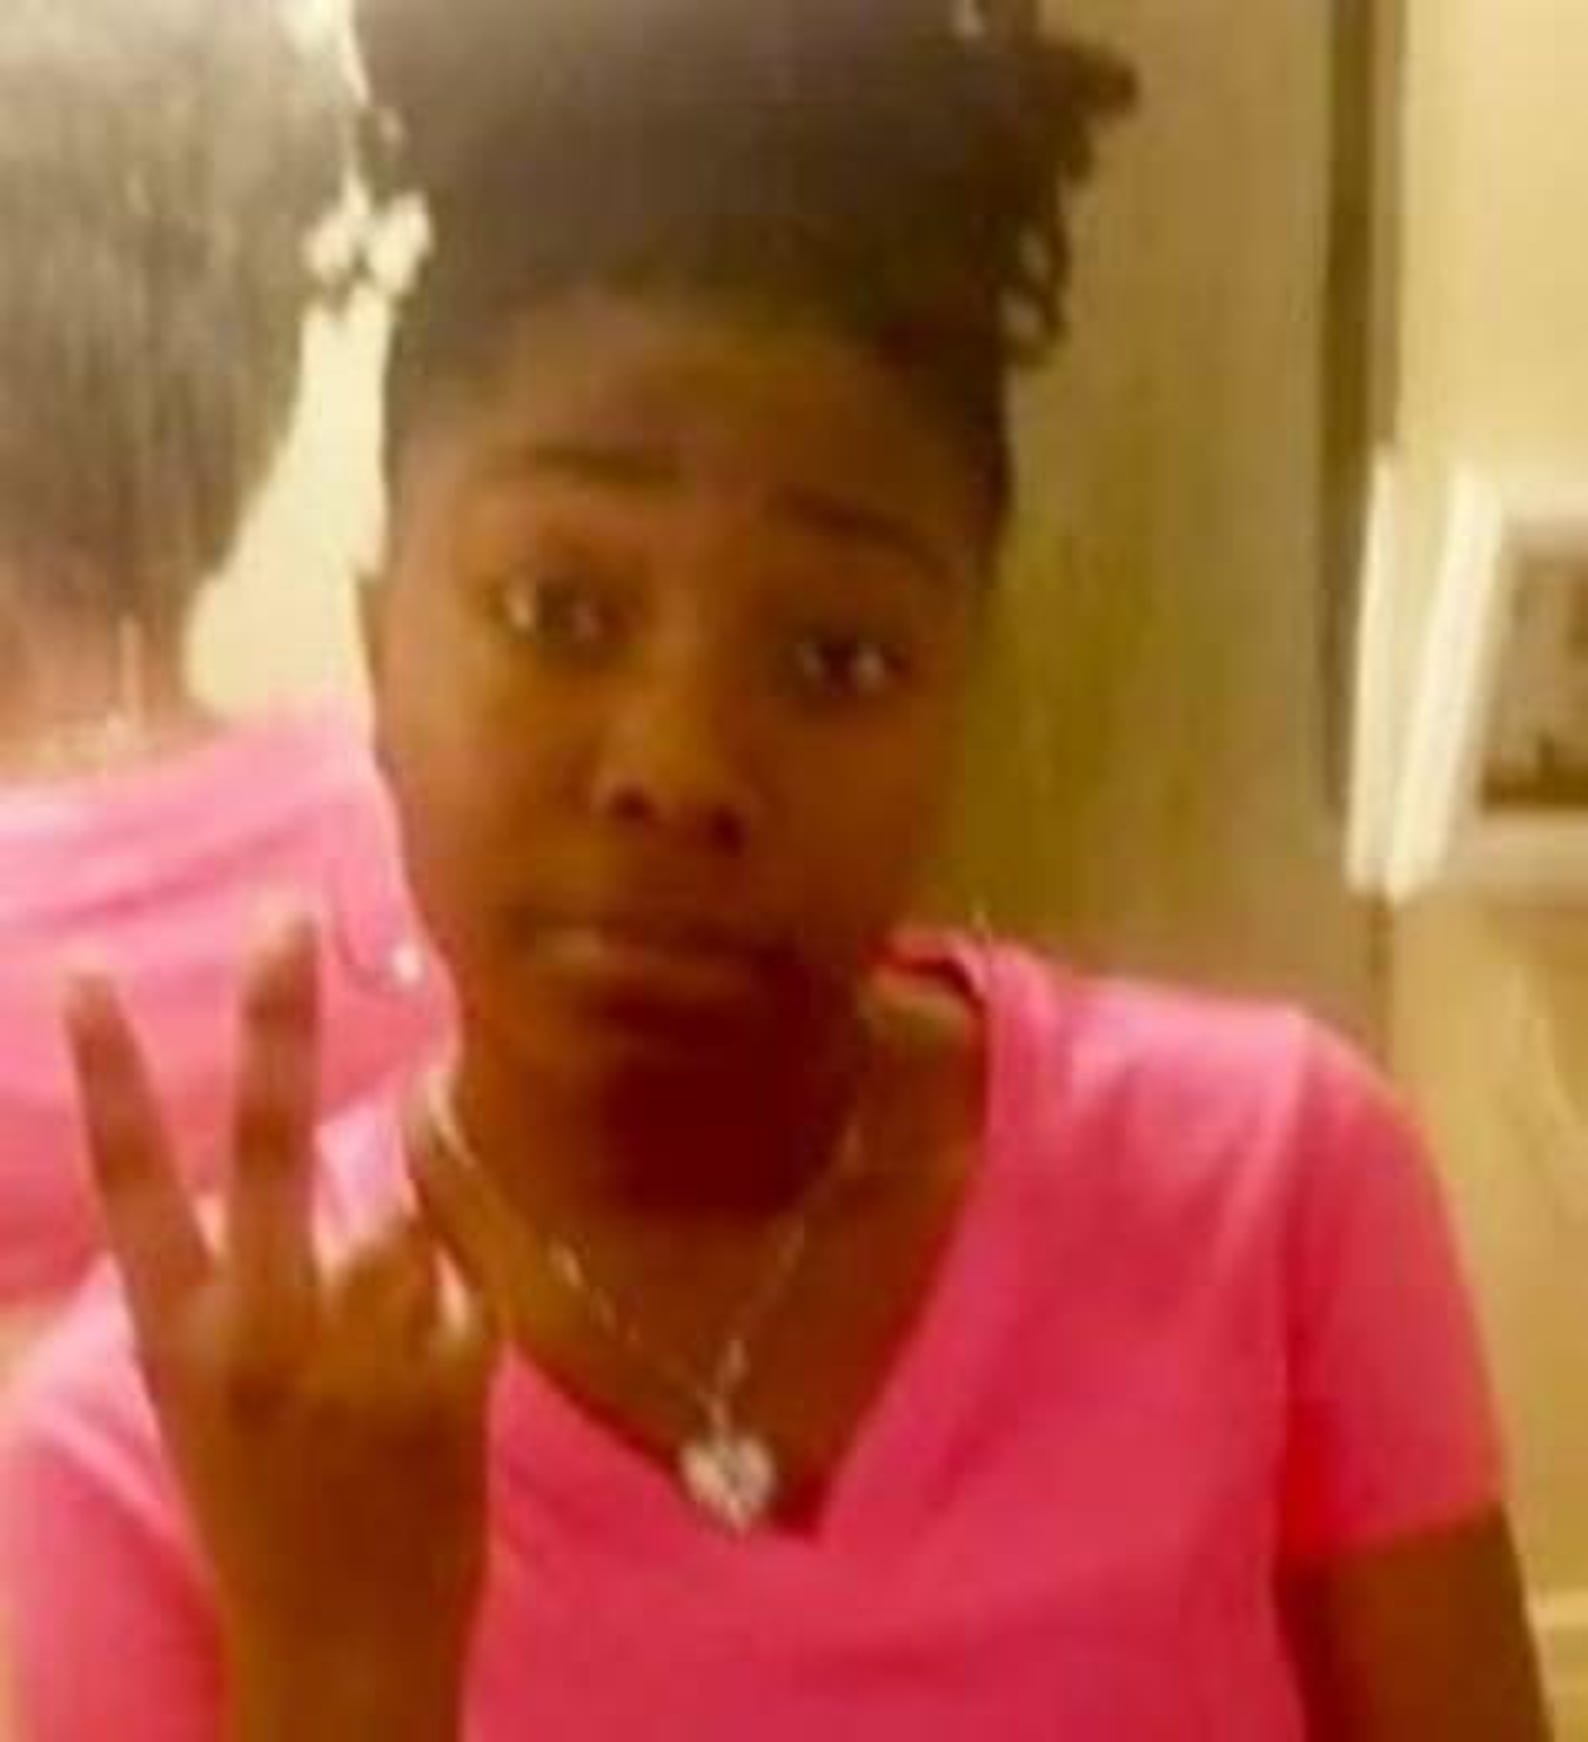 Lashaya Stine was 16 when she went missing from Aurora, Colorado, on July 15, 2016. More information and age-progressed photos here.